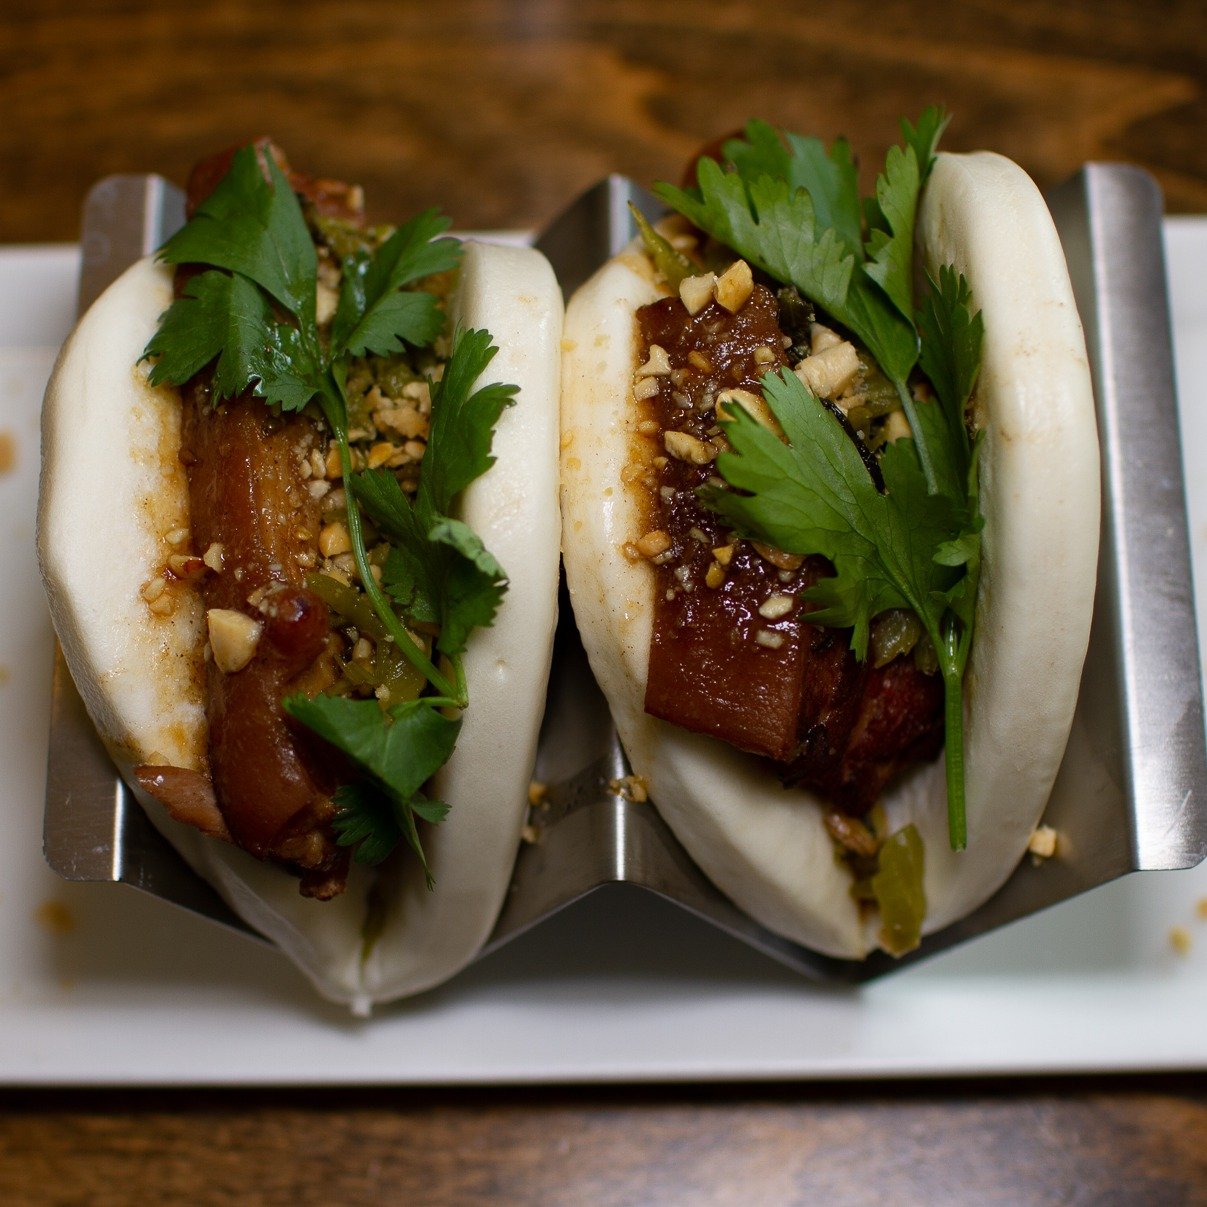 Taiwanese Pork Belly Bao, a.k.a Gua Bao (割包). It means a cut-open bun, originating from the coastal regions of Fujian province in China, Gua Bao is one of the most popular appetizers in Taiwan. We braised the skin-on pork belly with spices and soy sa